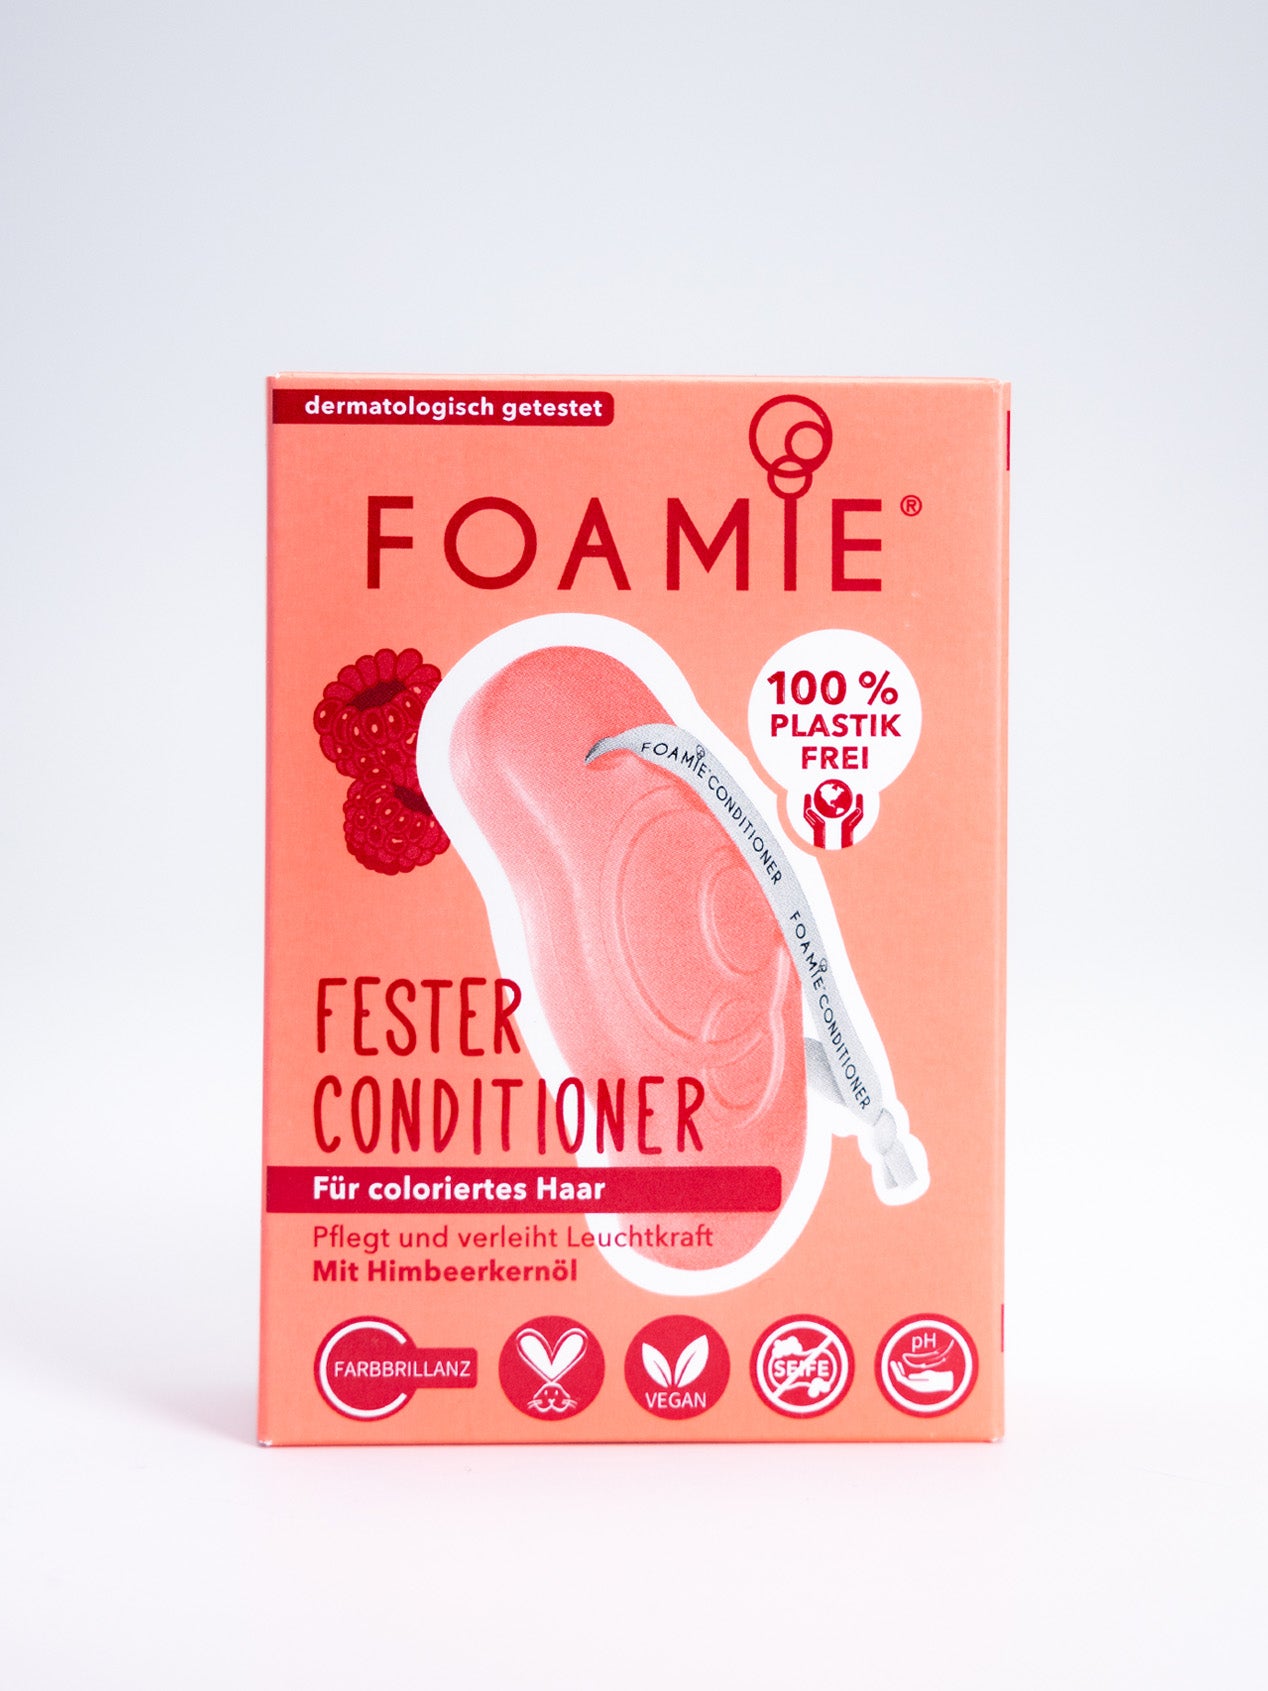 Foamie The Berry Best Conditioner Bar for Coloured Hair (80g)